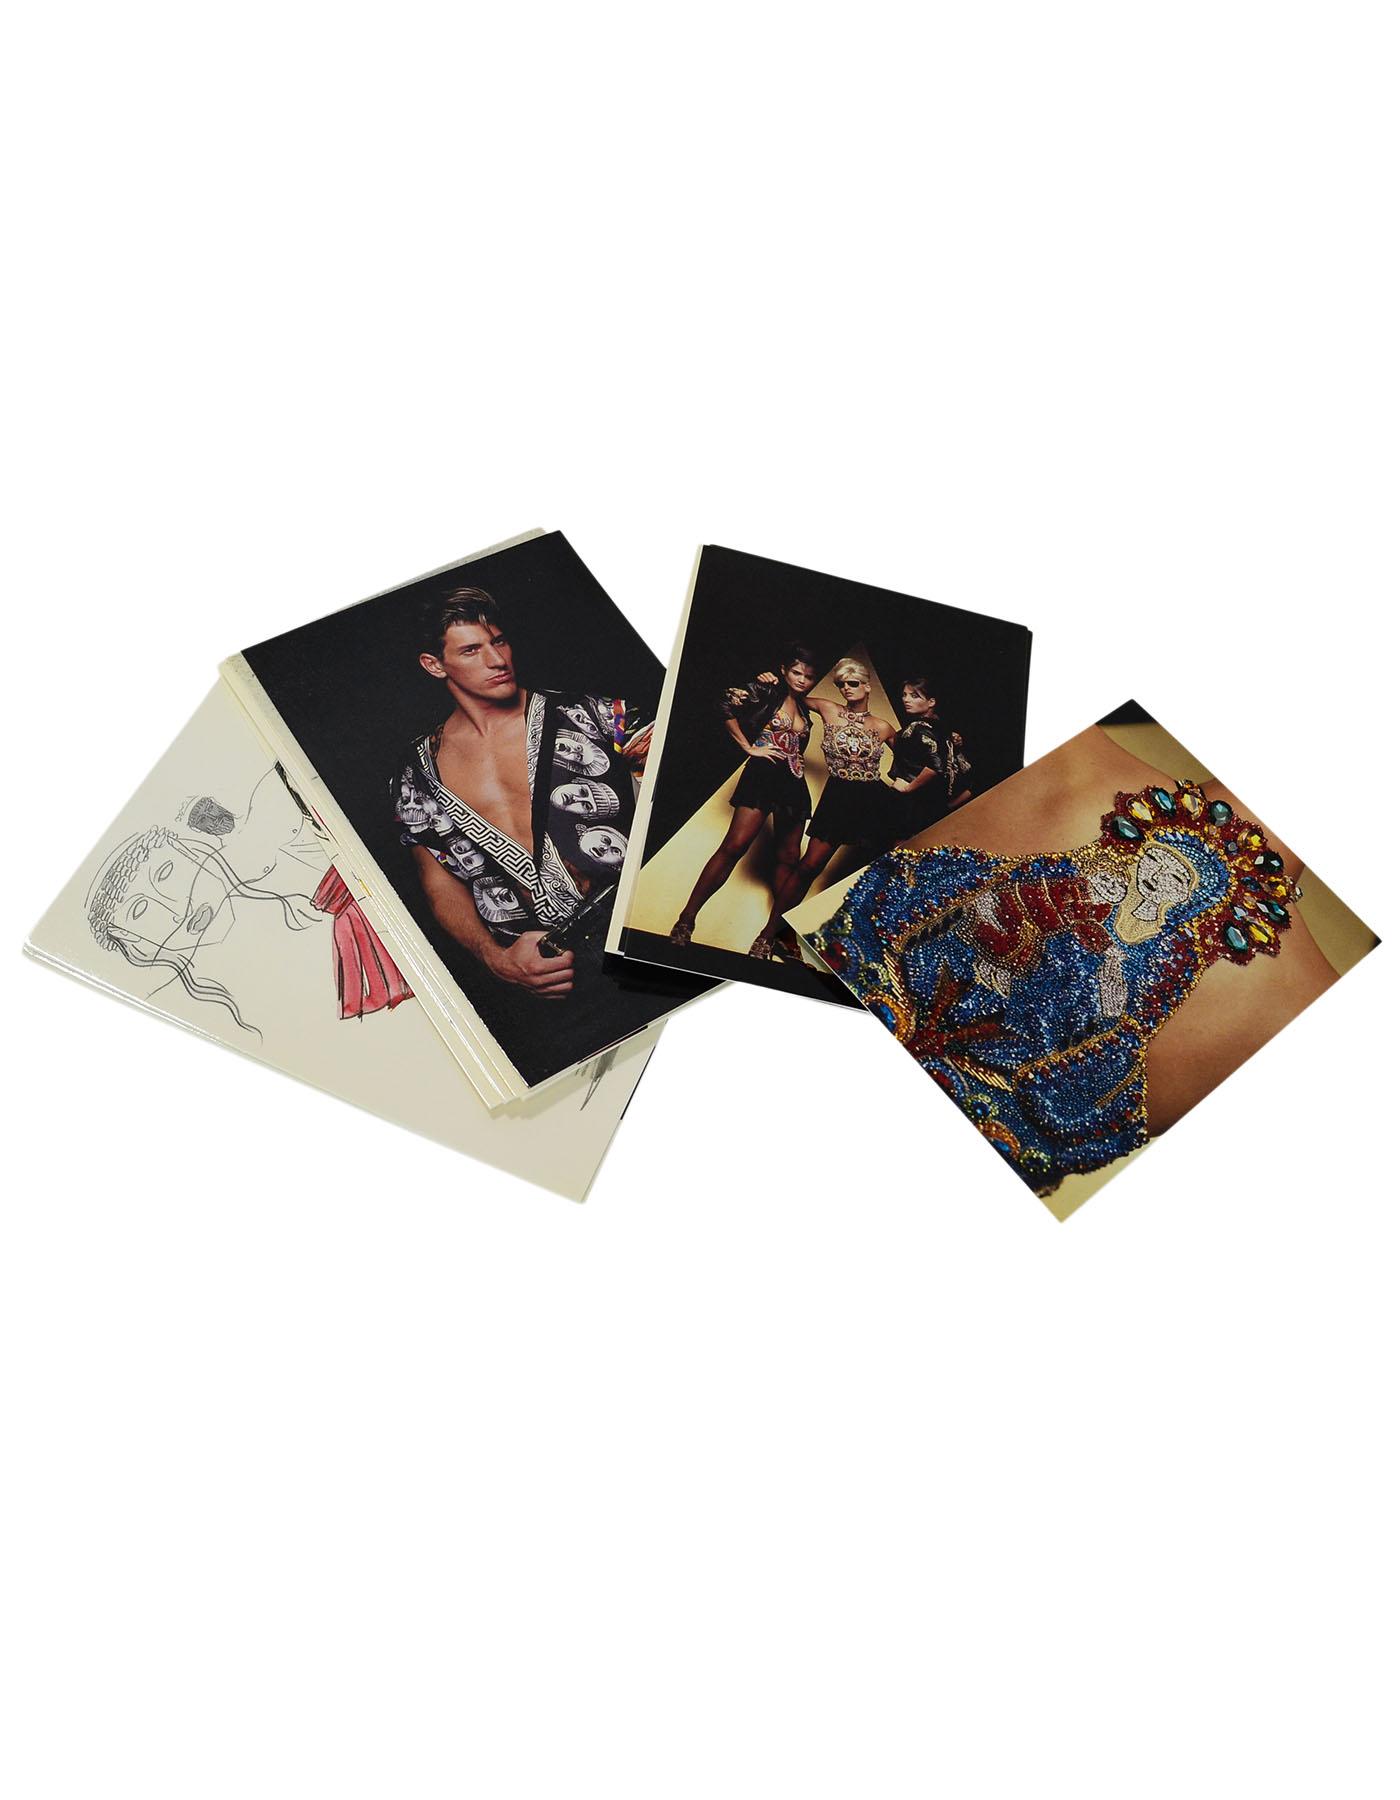 Gianni Versace Roc N' Rule Vintage Postcards

Set of 20 postcards with box

Condition: Excellent vintage pre-owned condition - some wear, splitting and yellowing at box corners
Measurements:
4